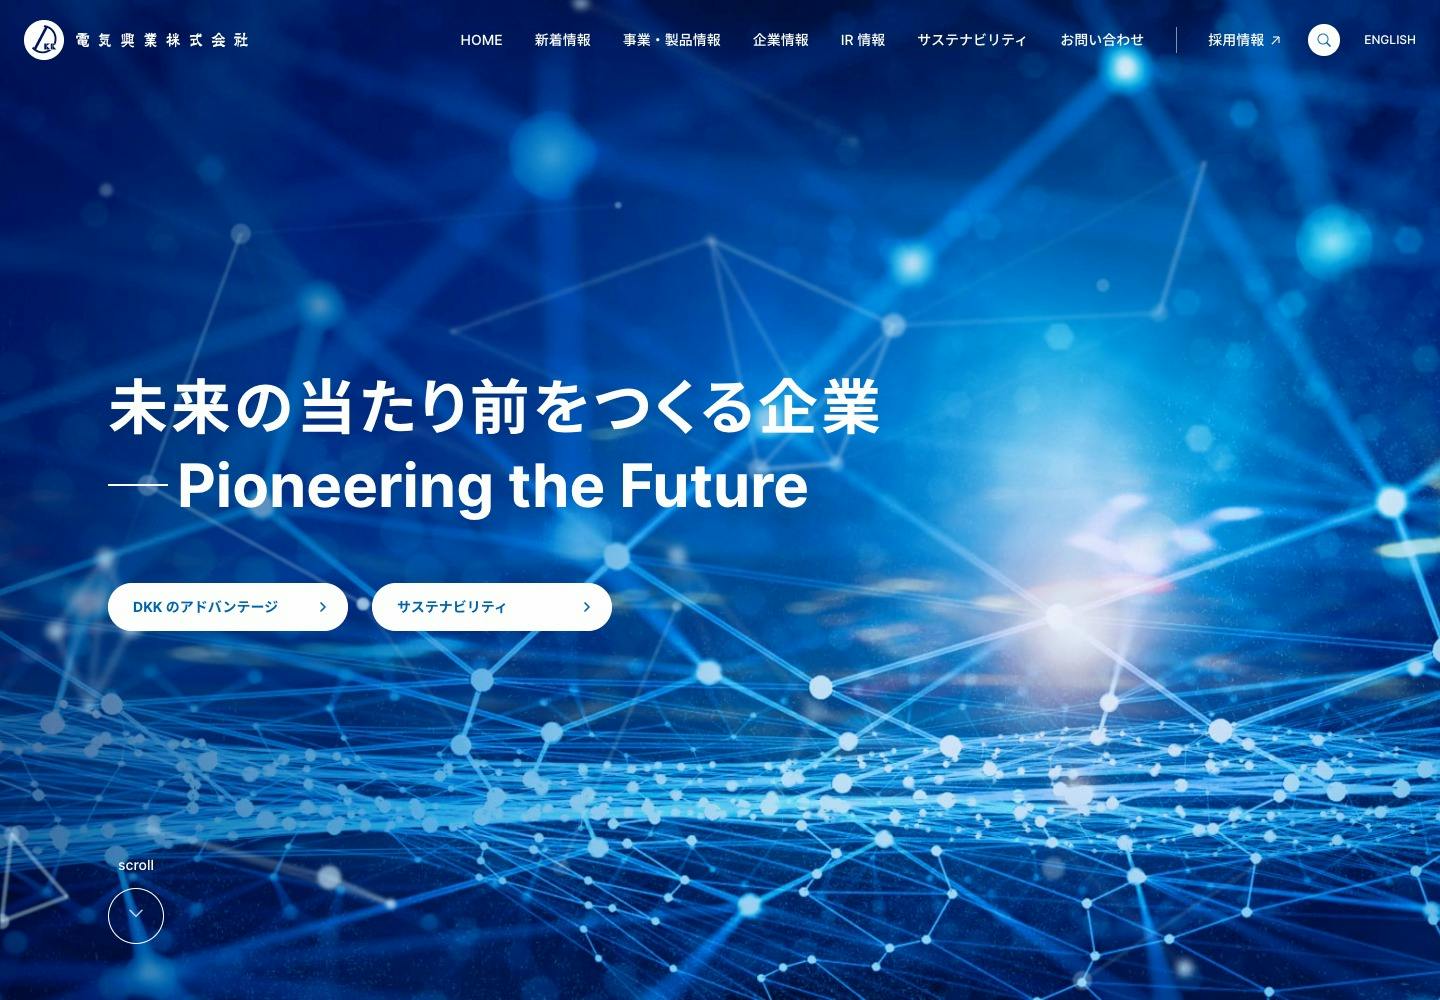 Cover Image for DKK 電気興業株式会社 | 未来の当たり前をつくる企業 ―Pioneering the Future